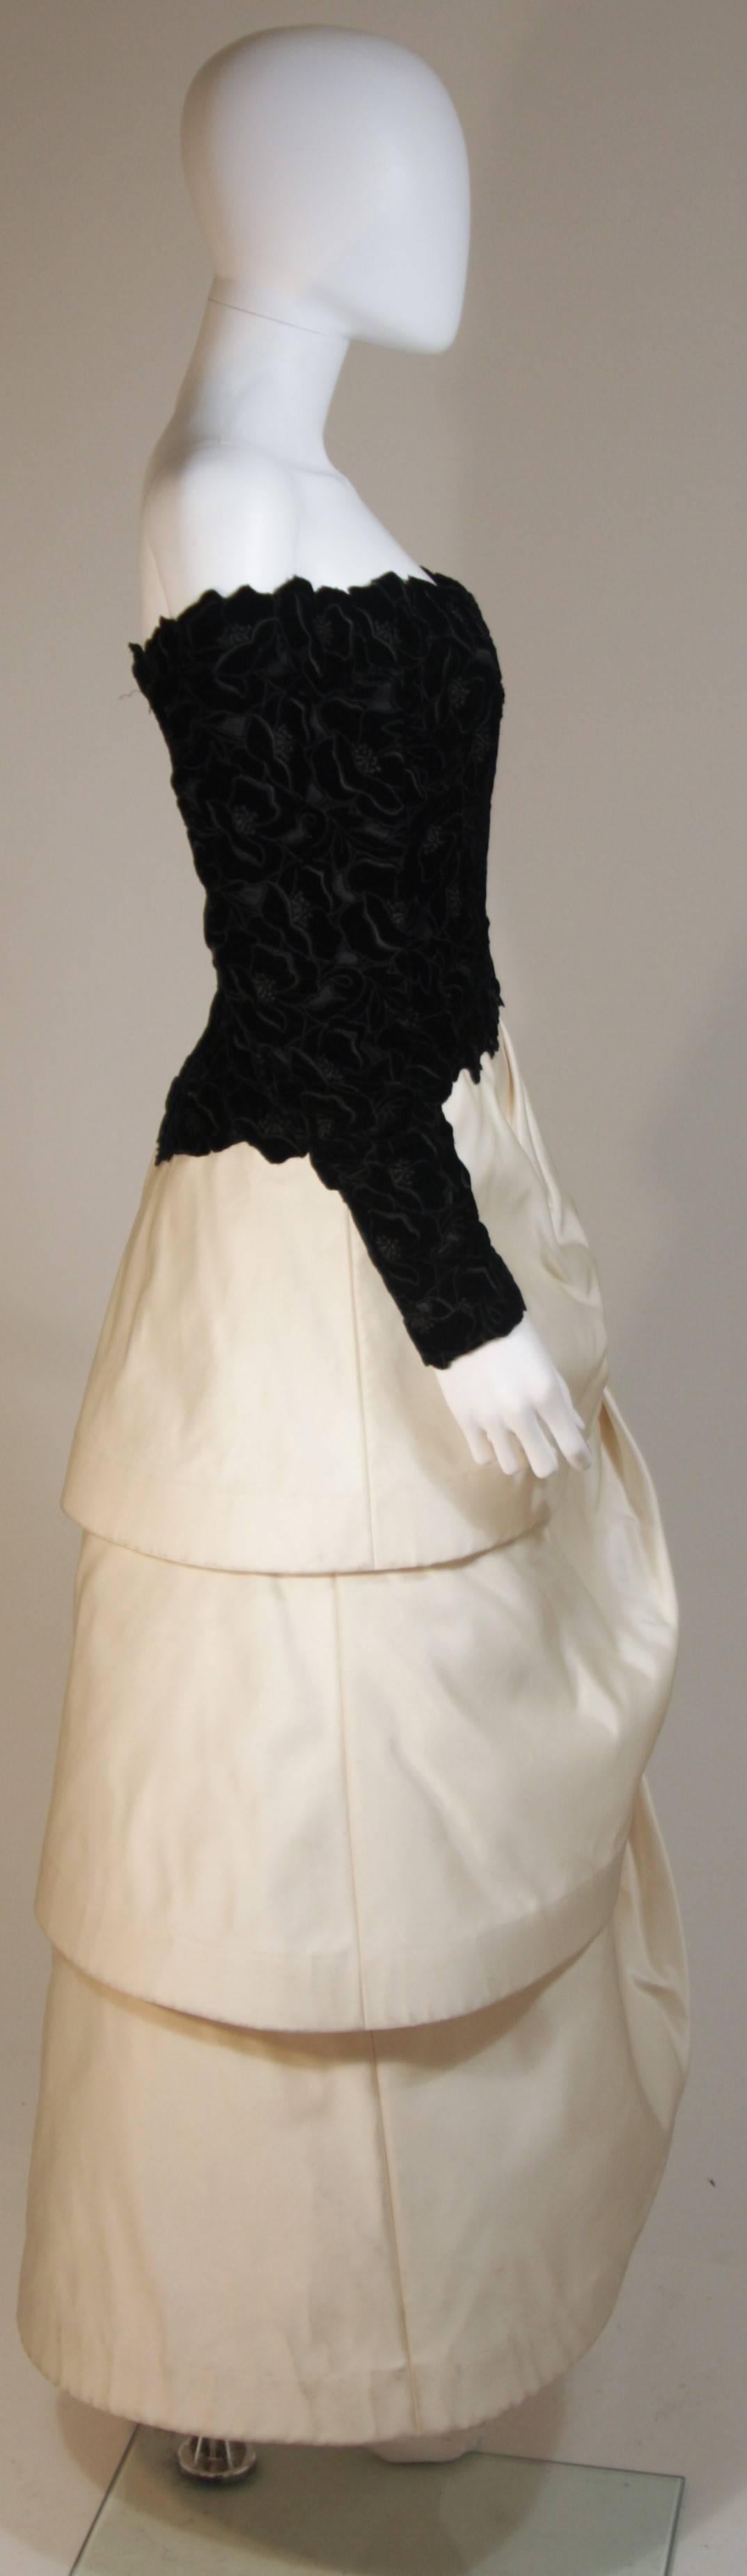 ARNOLD SCAASI Black Velvet Floral Design Gown with Satin Tiered Skirt Size 12-14 For Sale 2